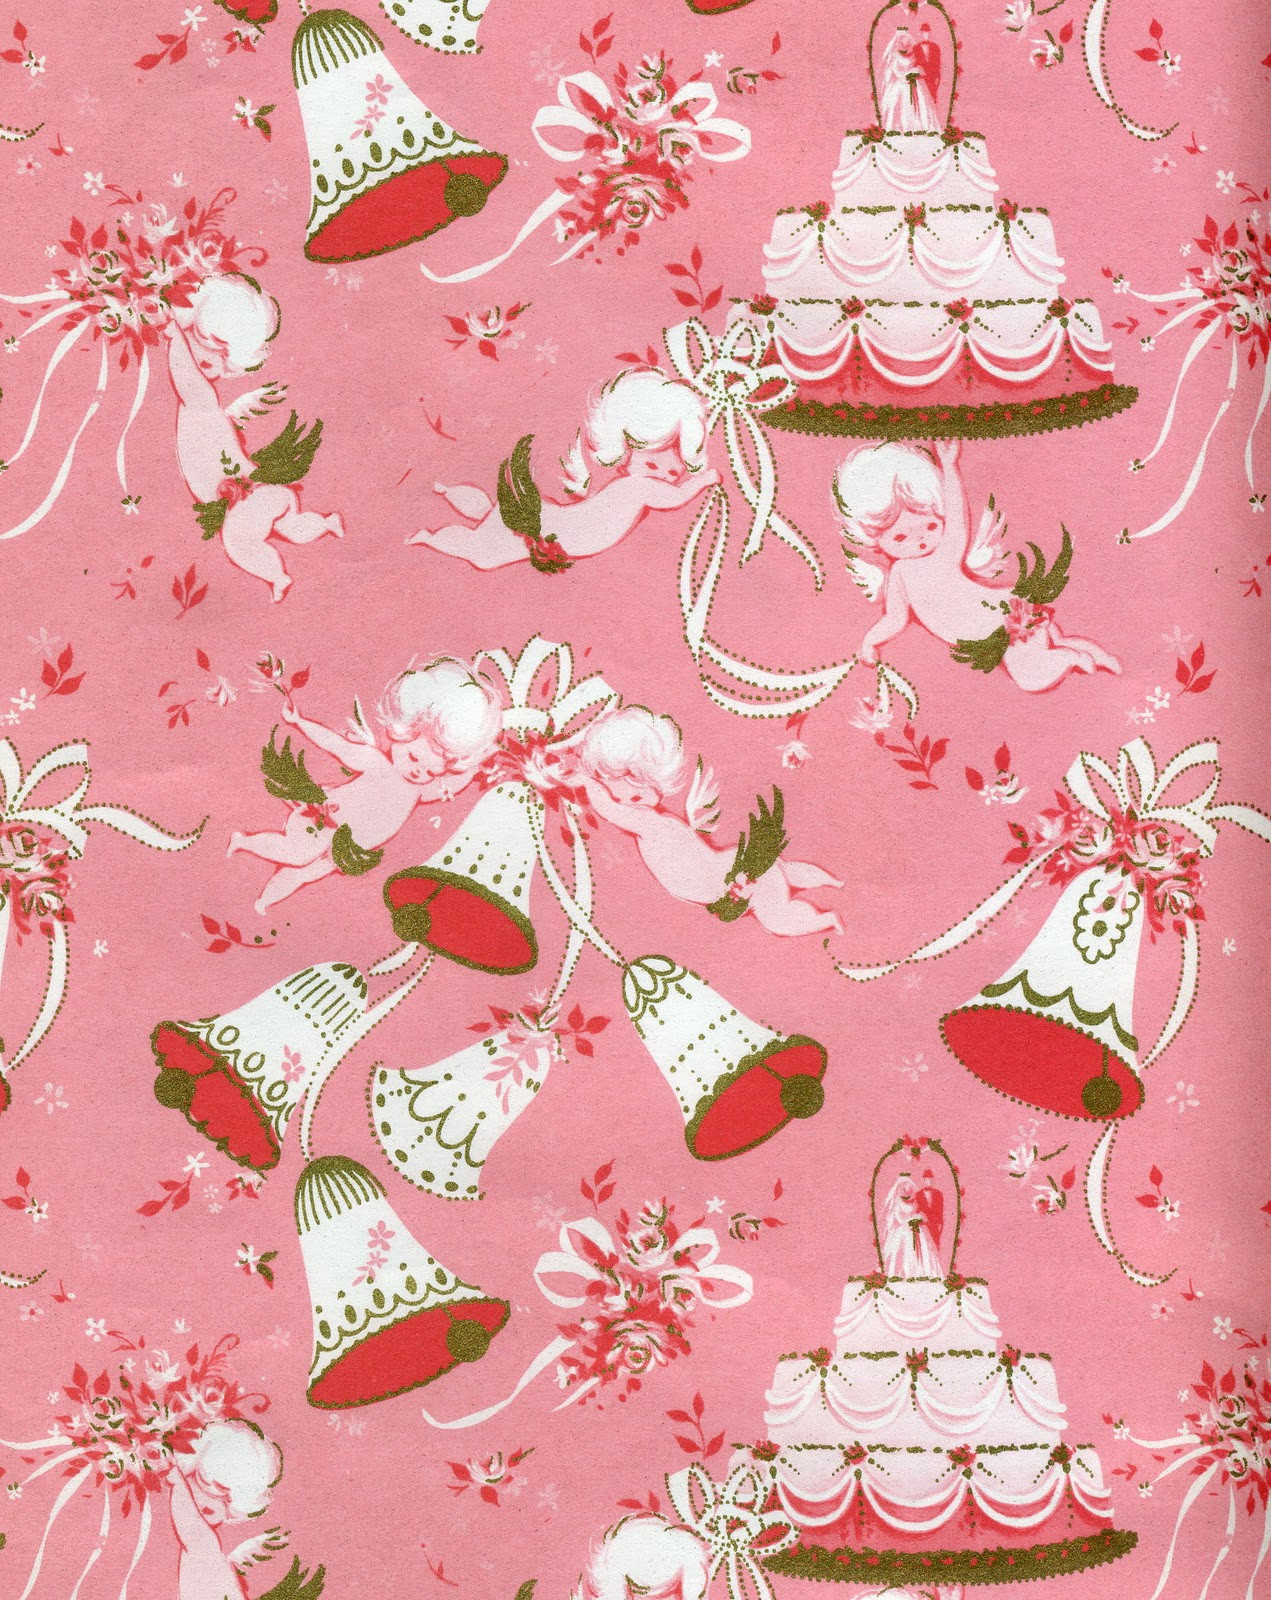 Wedding Gift Wrapping Paper
 Buttercup Bungalow Vintage wedding t wrap